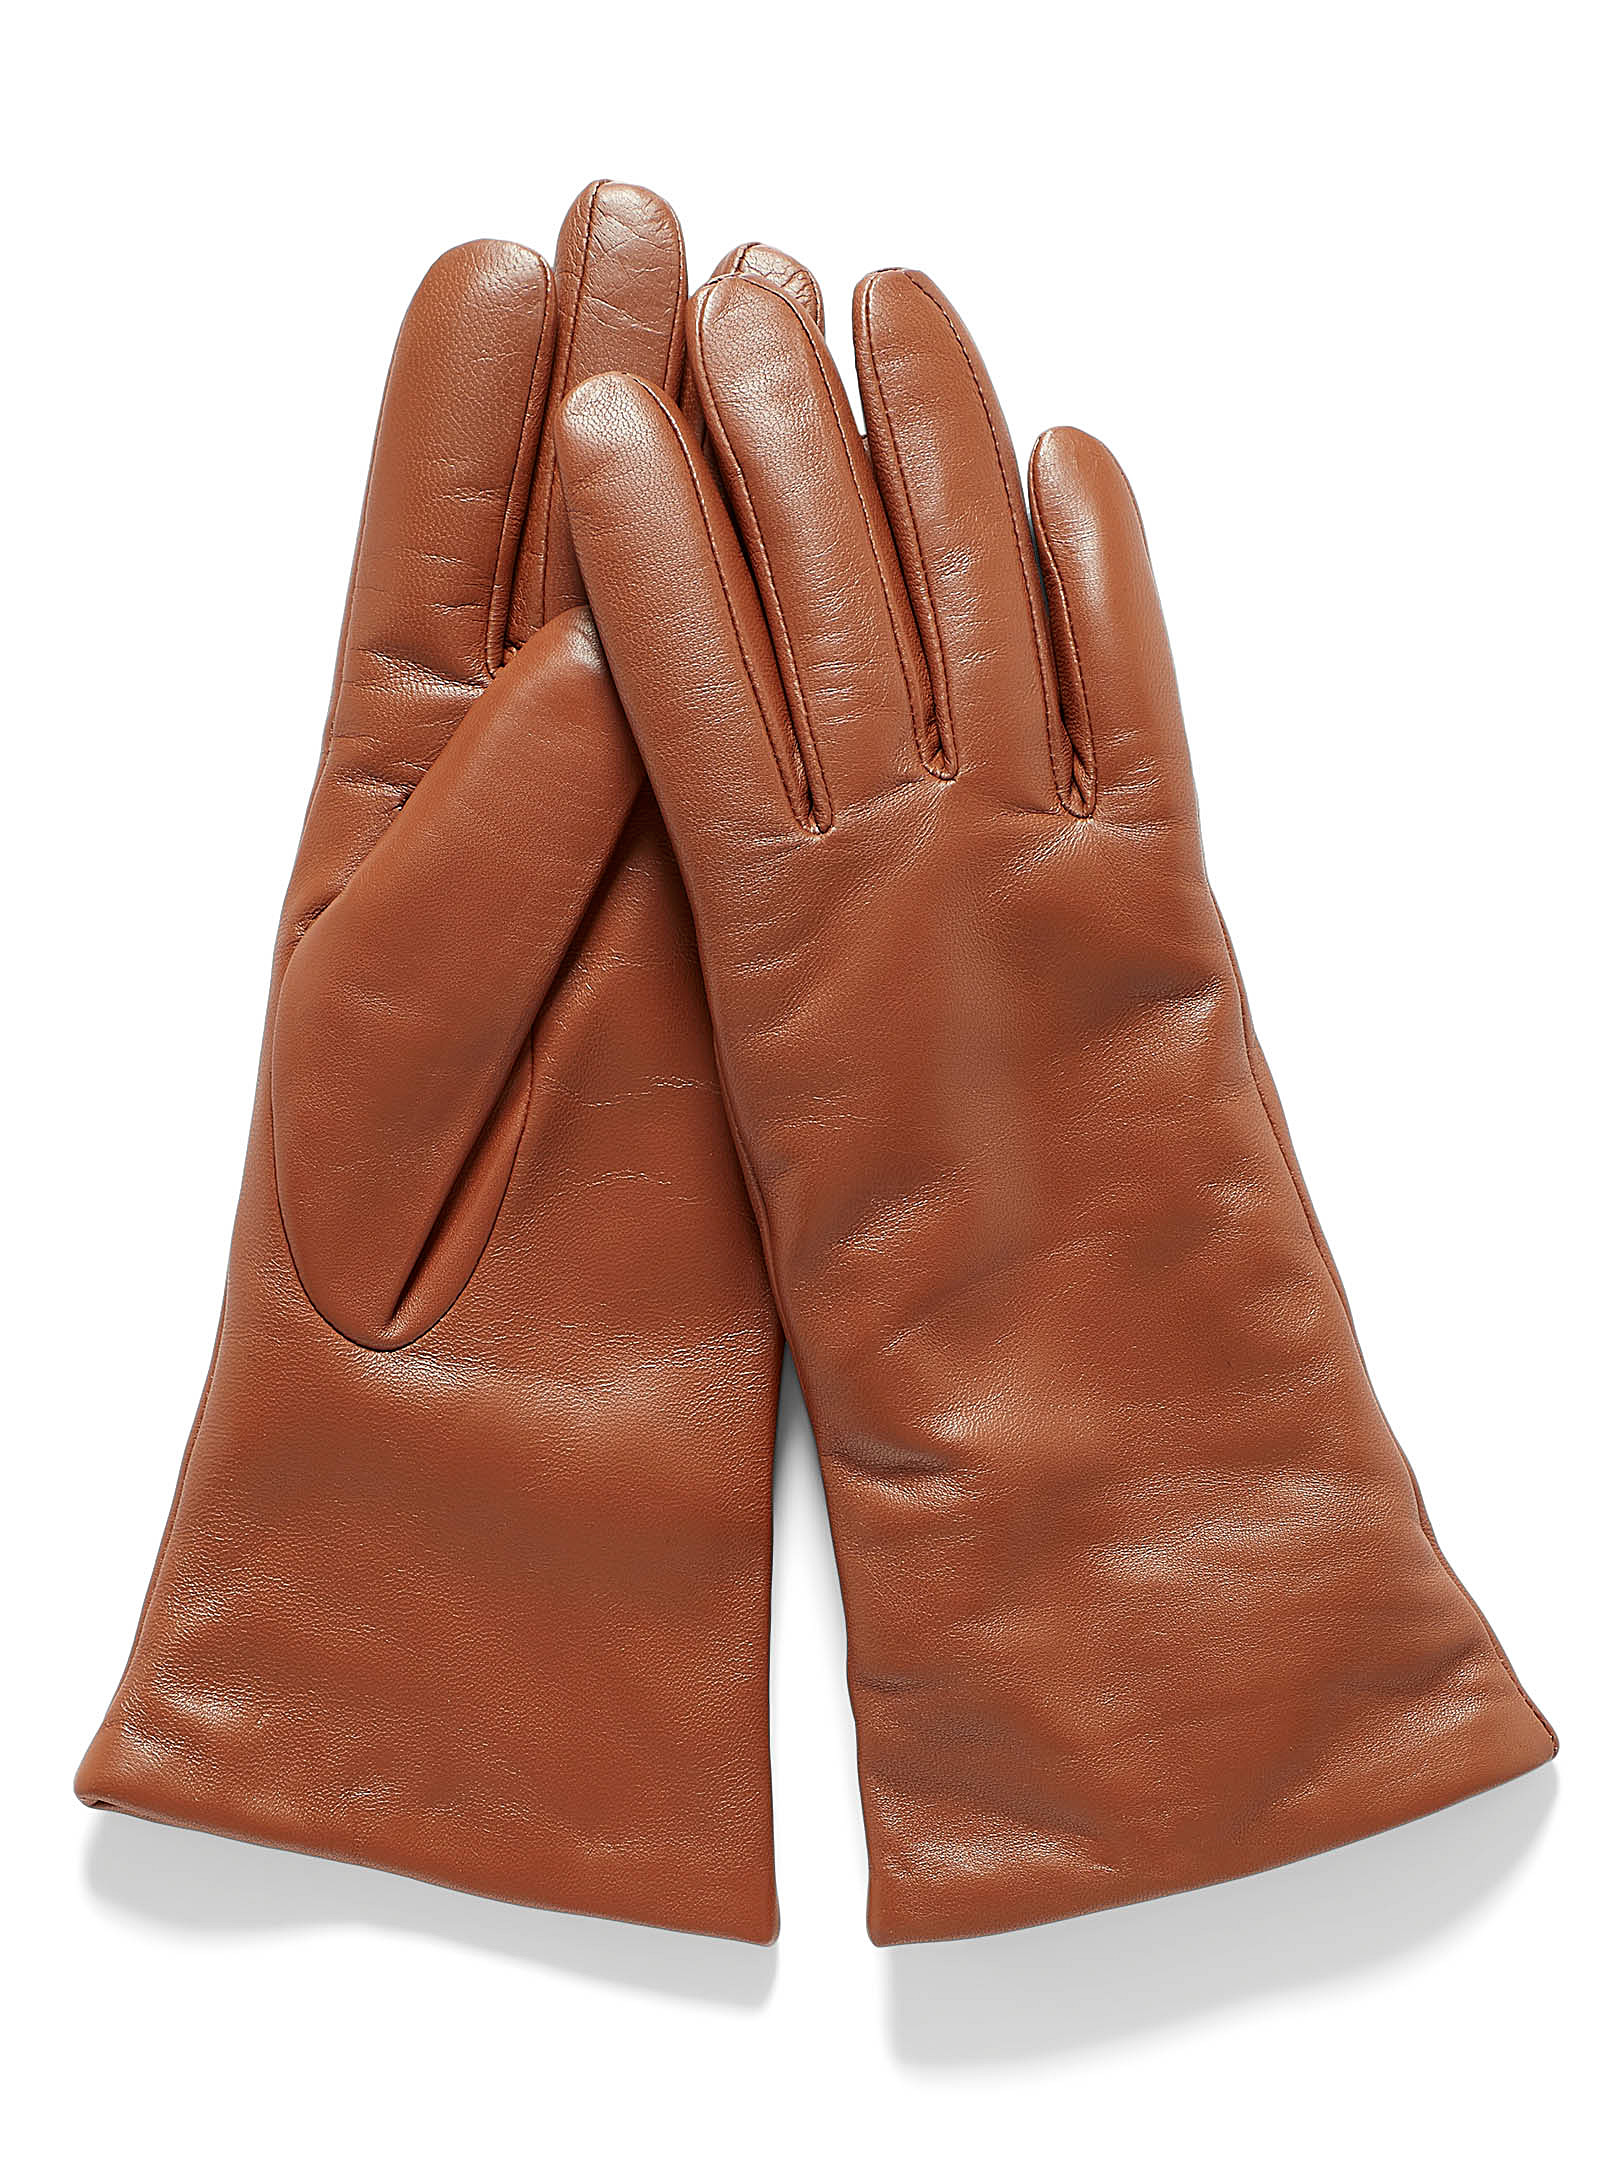 Brume - Women's Smooth leather cashmere-lined gloves